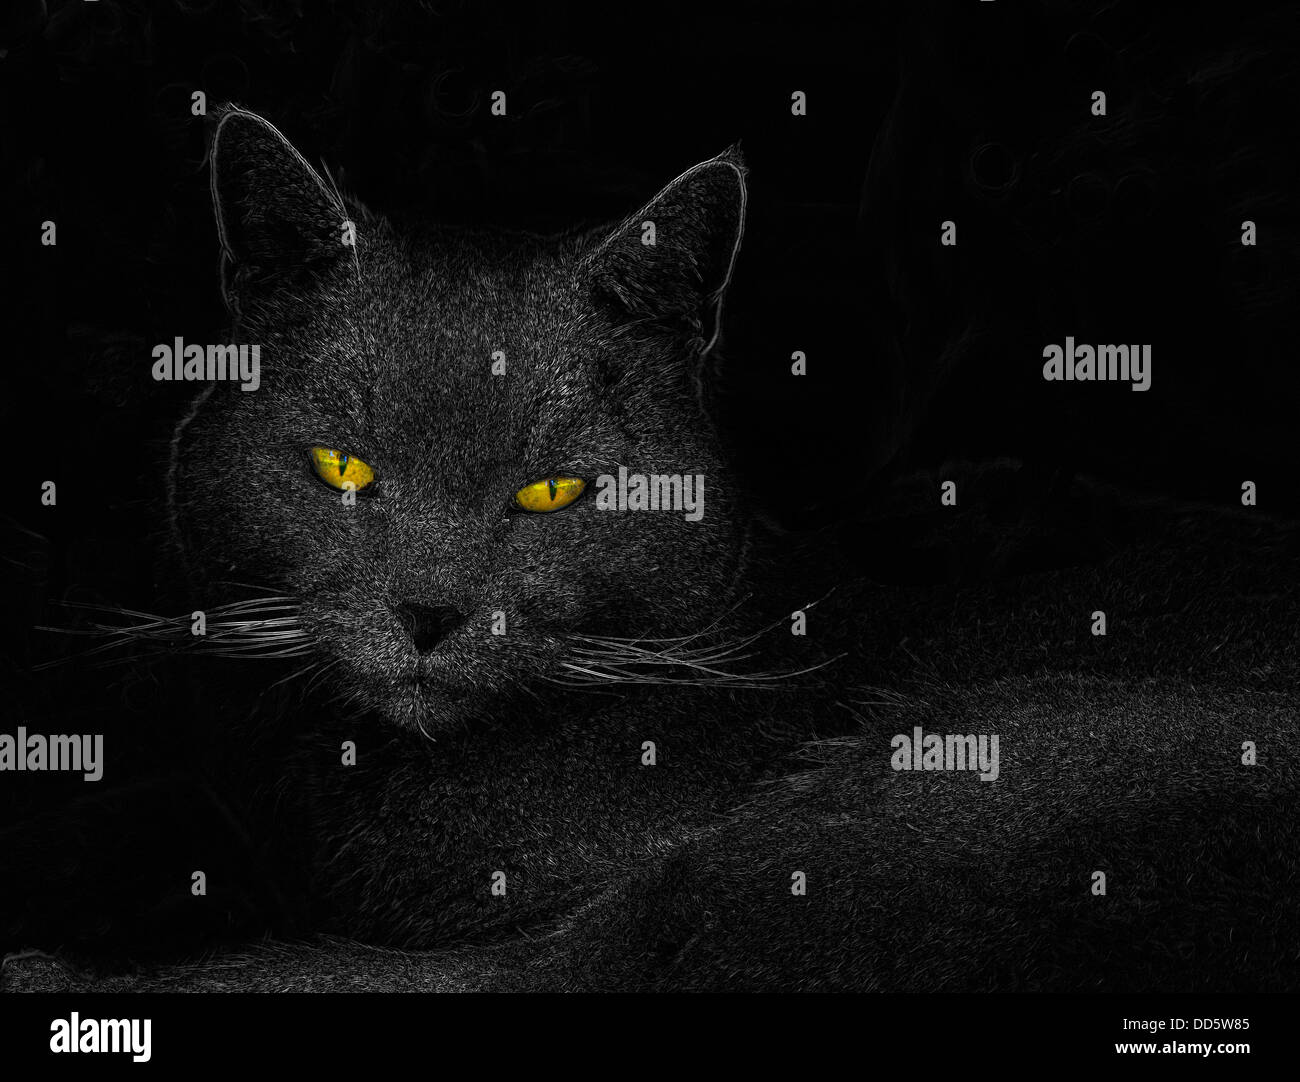 An etching like image of a cat with vivid yellow eyes. Stock Photo